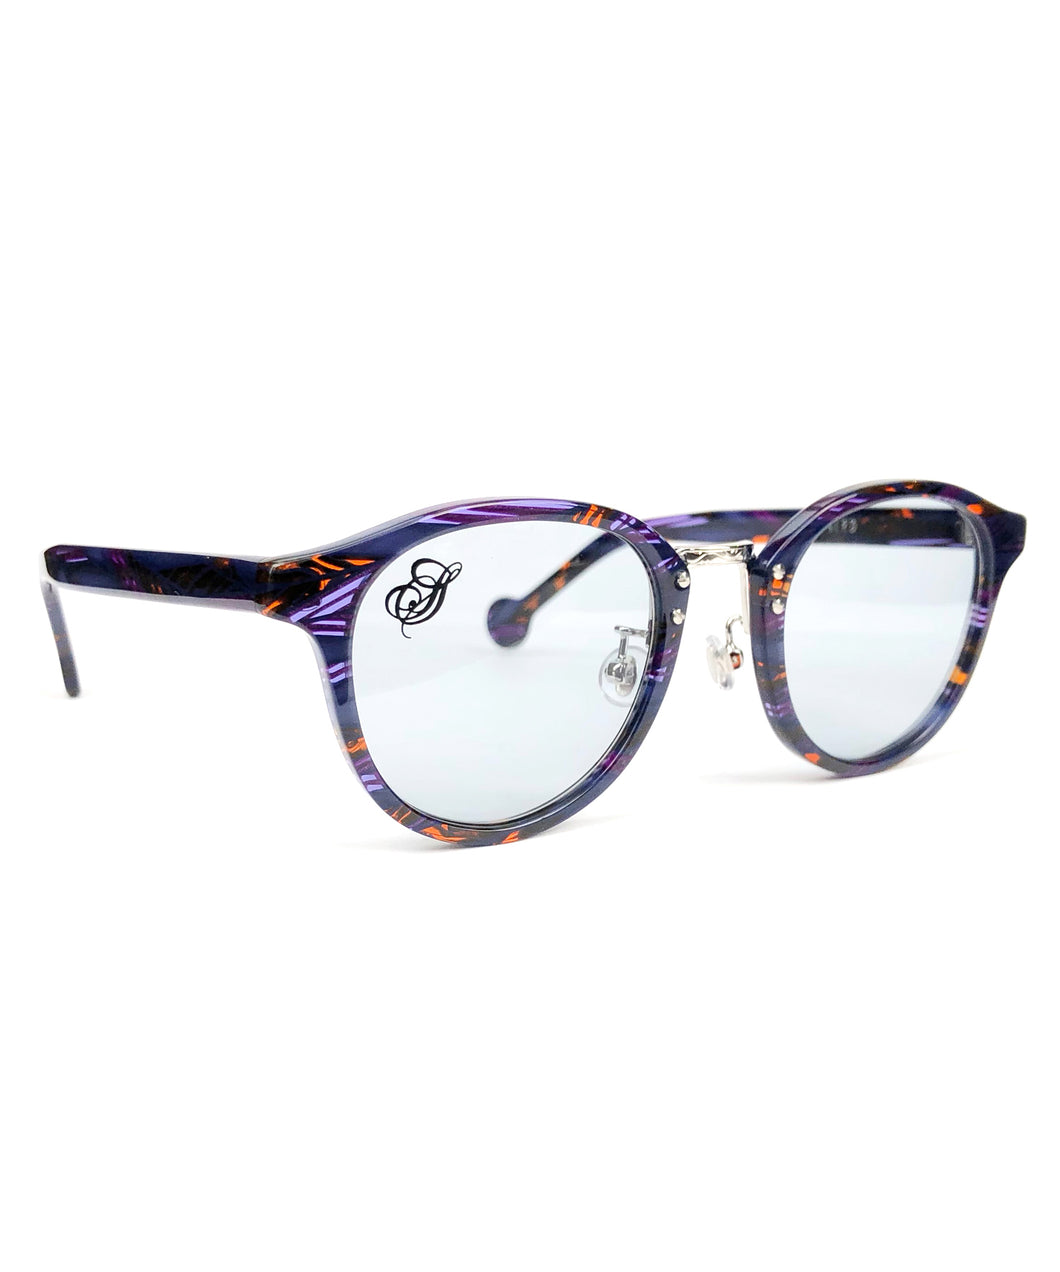 Session by STRUM Special Order Sunglasses - Purple